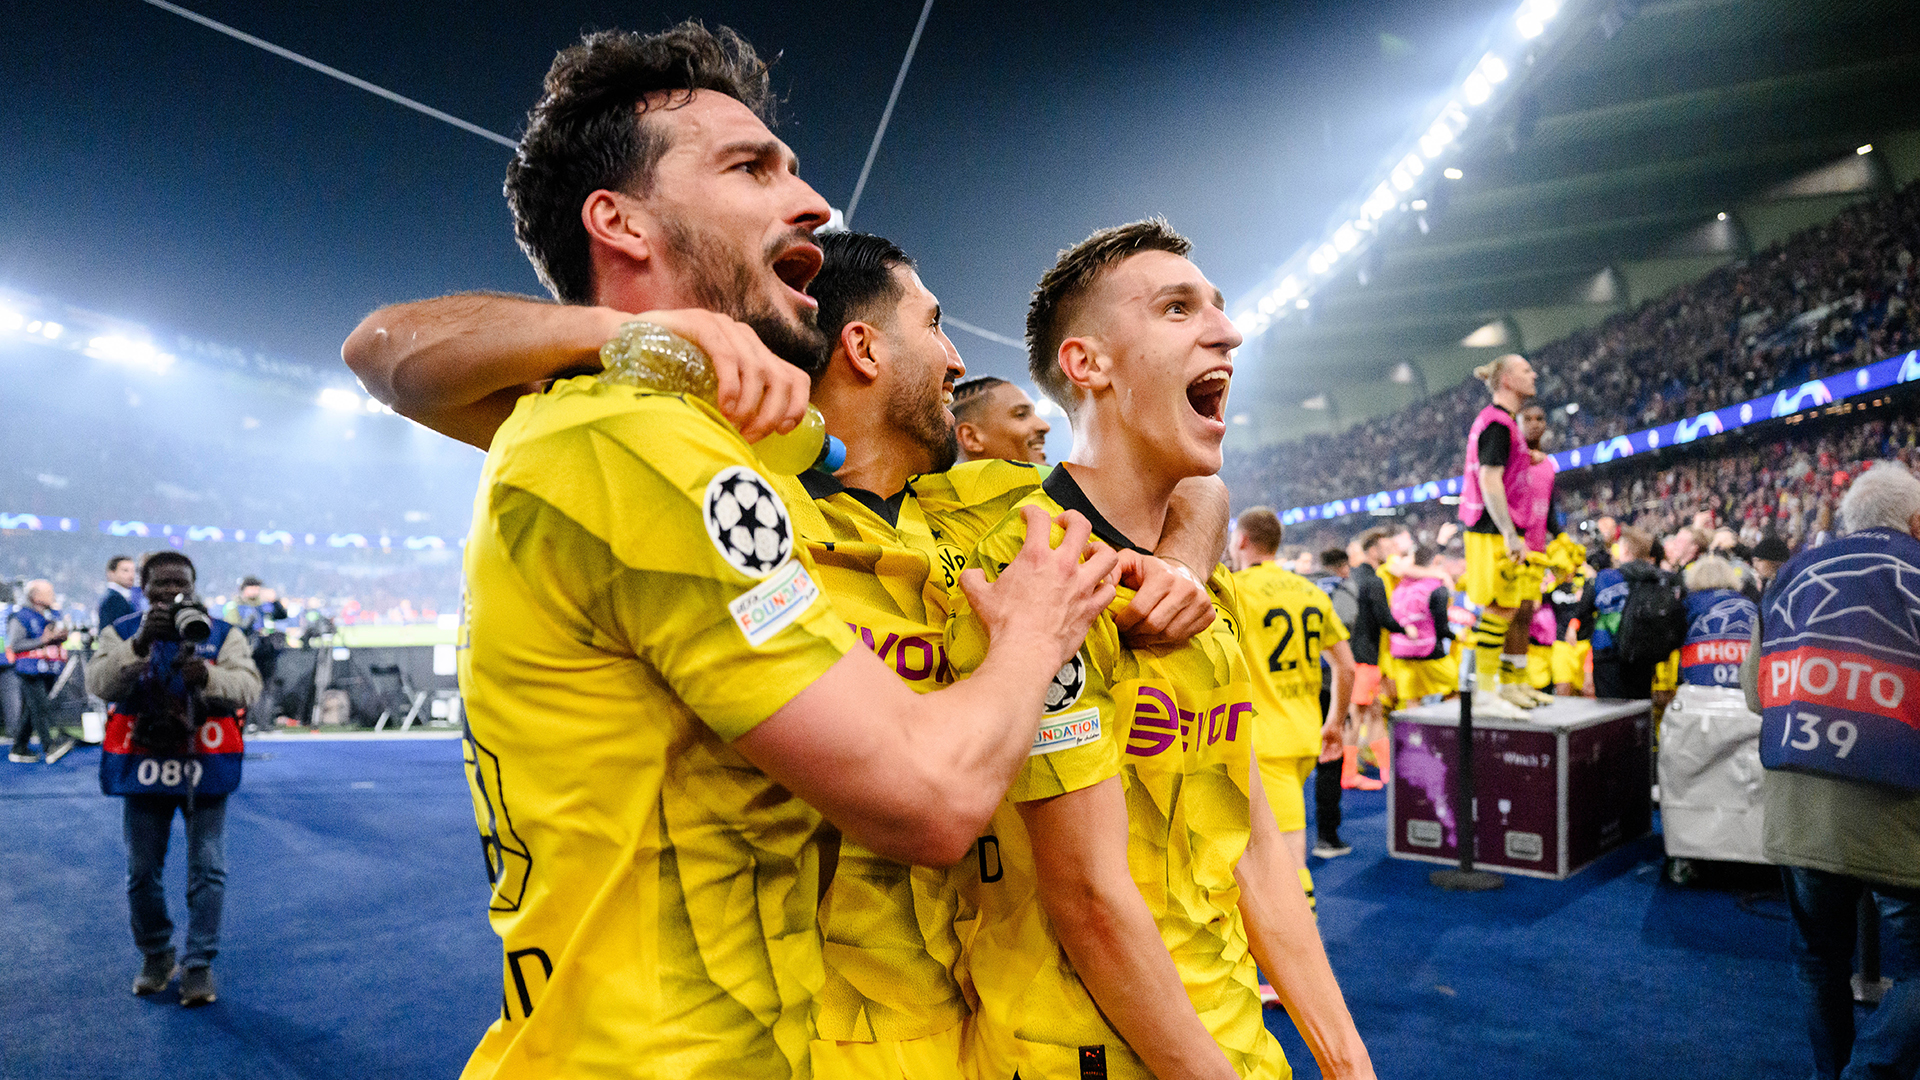 Mats Hummels, Emre Can and Nico Schlotterbeck (L-R) celebrates victory after the UEFA Champions League semi-final second leg match between Paris Saint-Germain and Borussia Dortmund at Parc des Princes on May 07, 2024 in Paris, France.